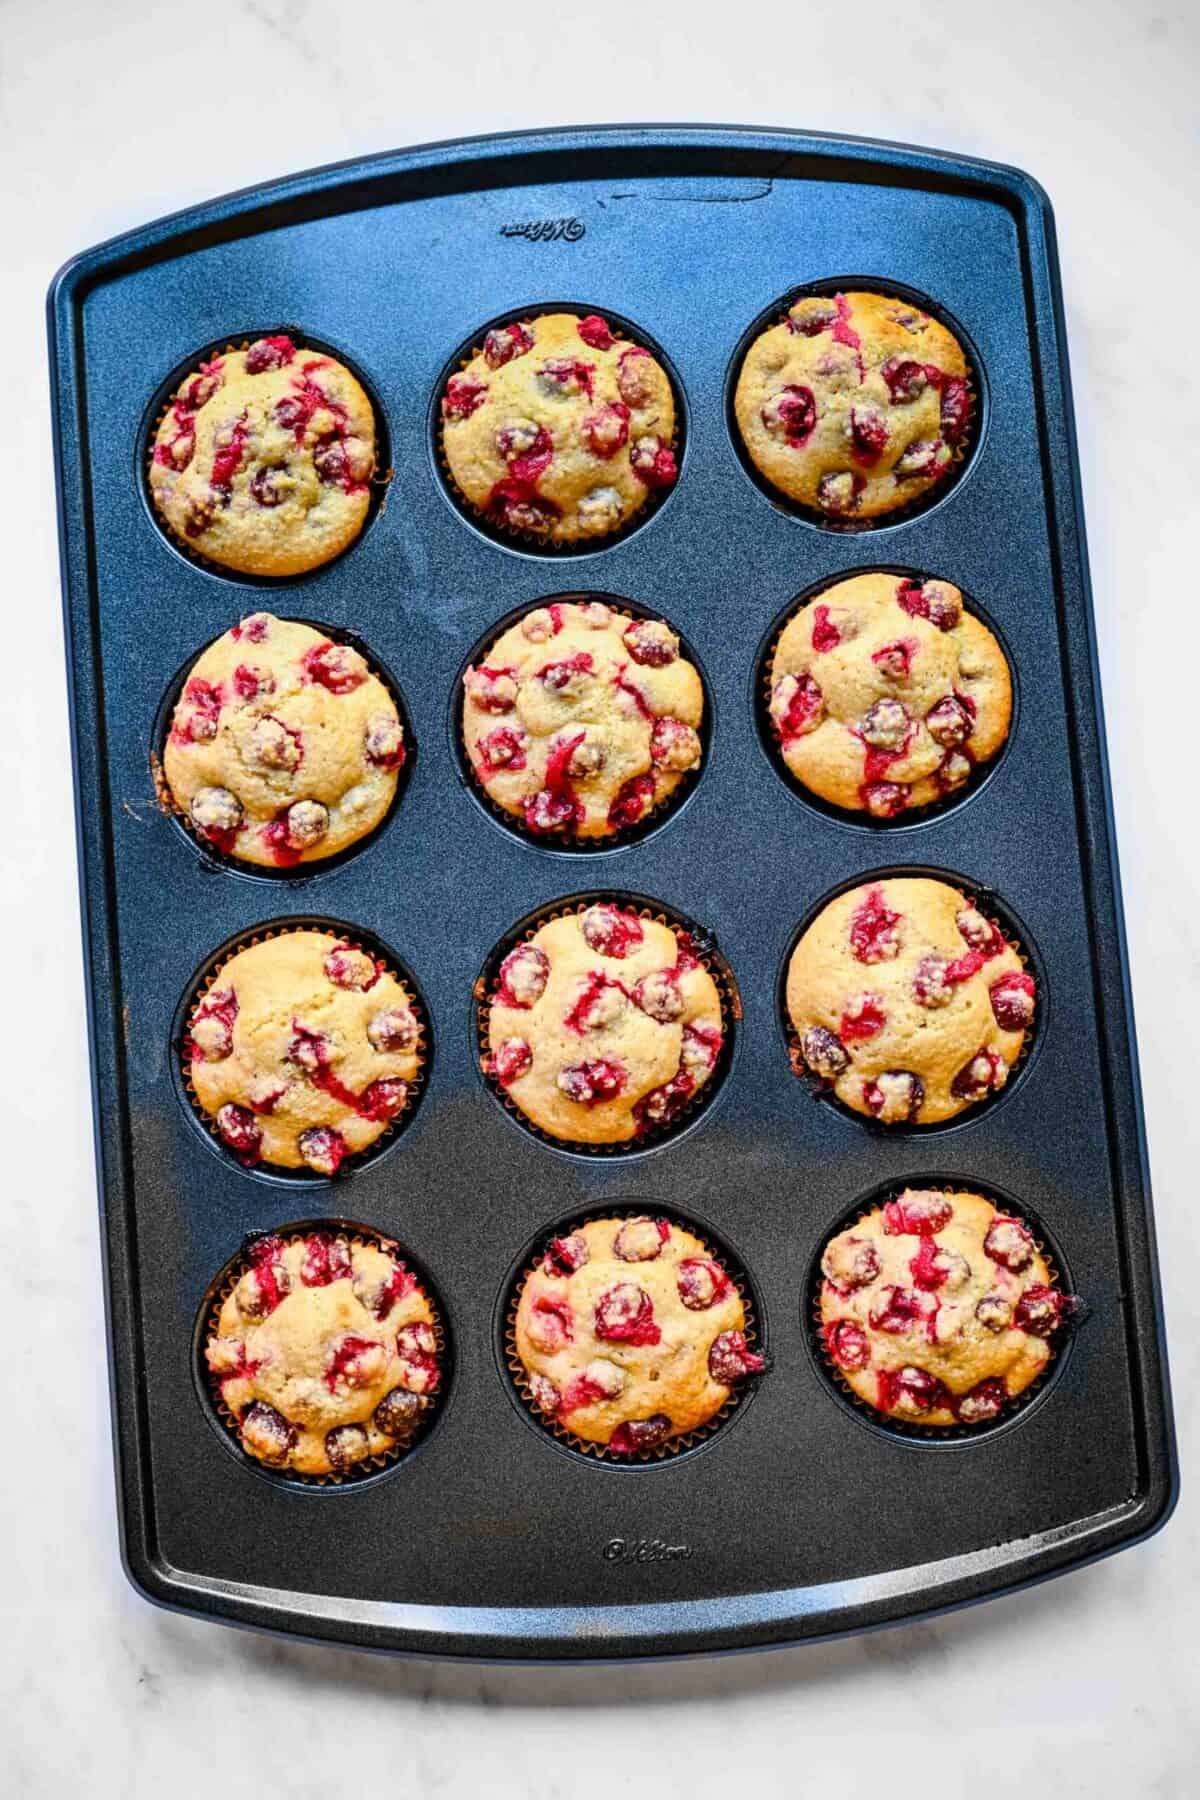 A muffin tin with 12 baked cranberry cornbread muffins in it